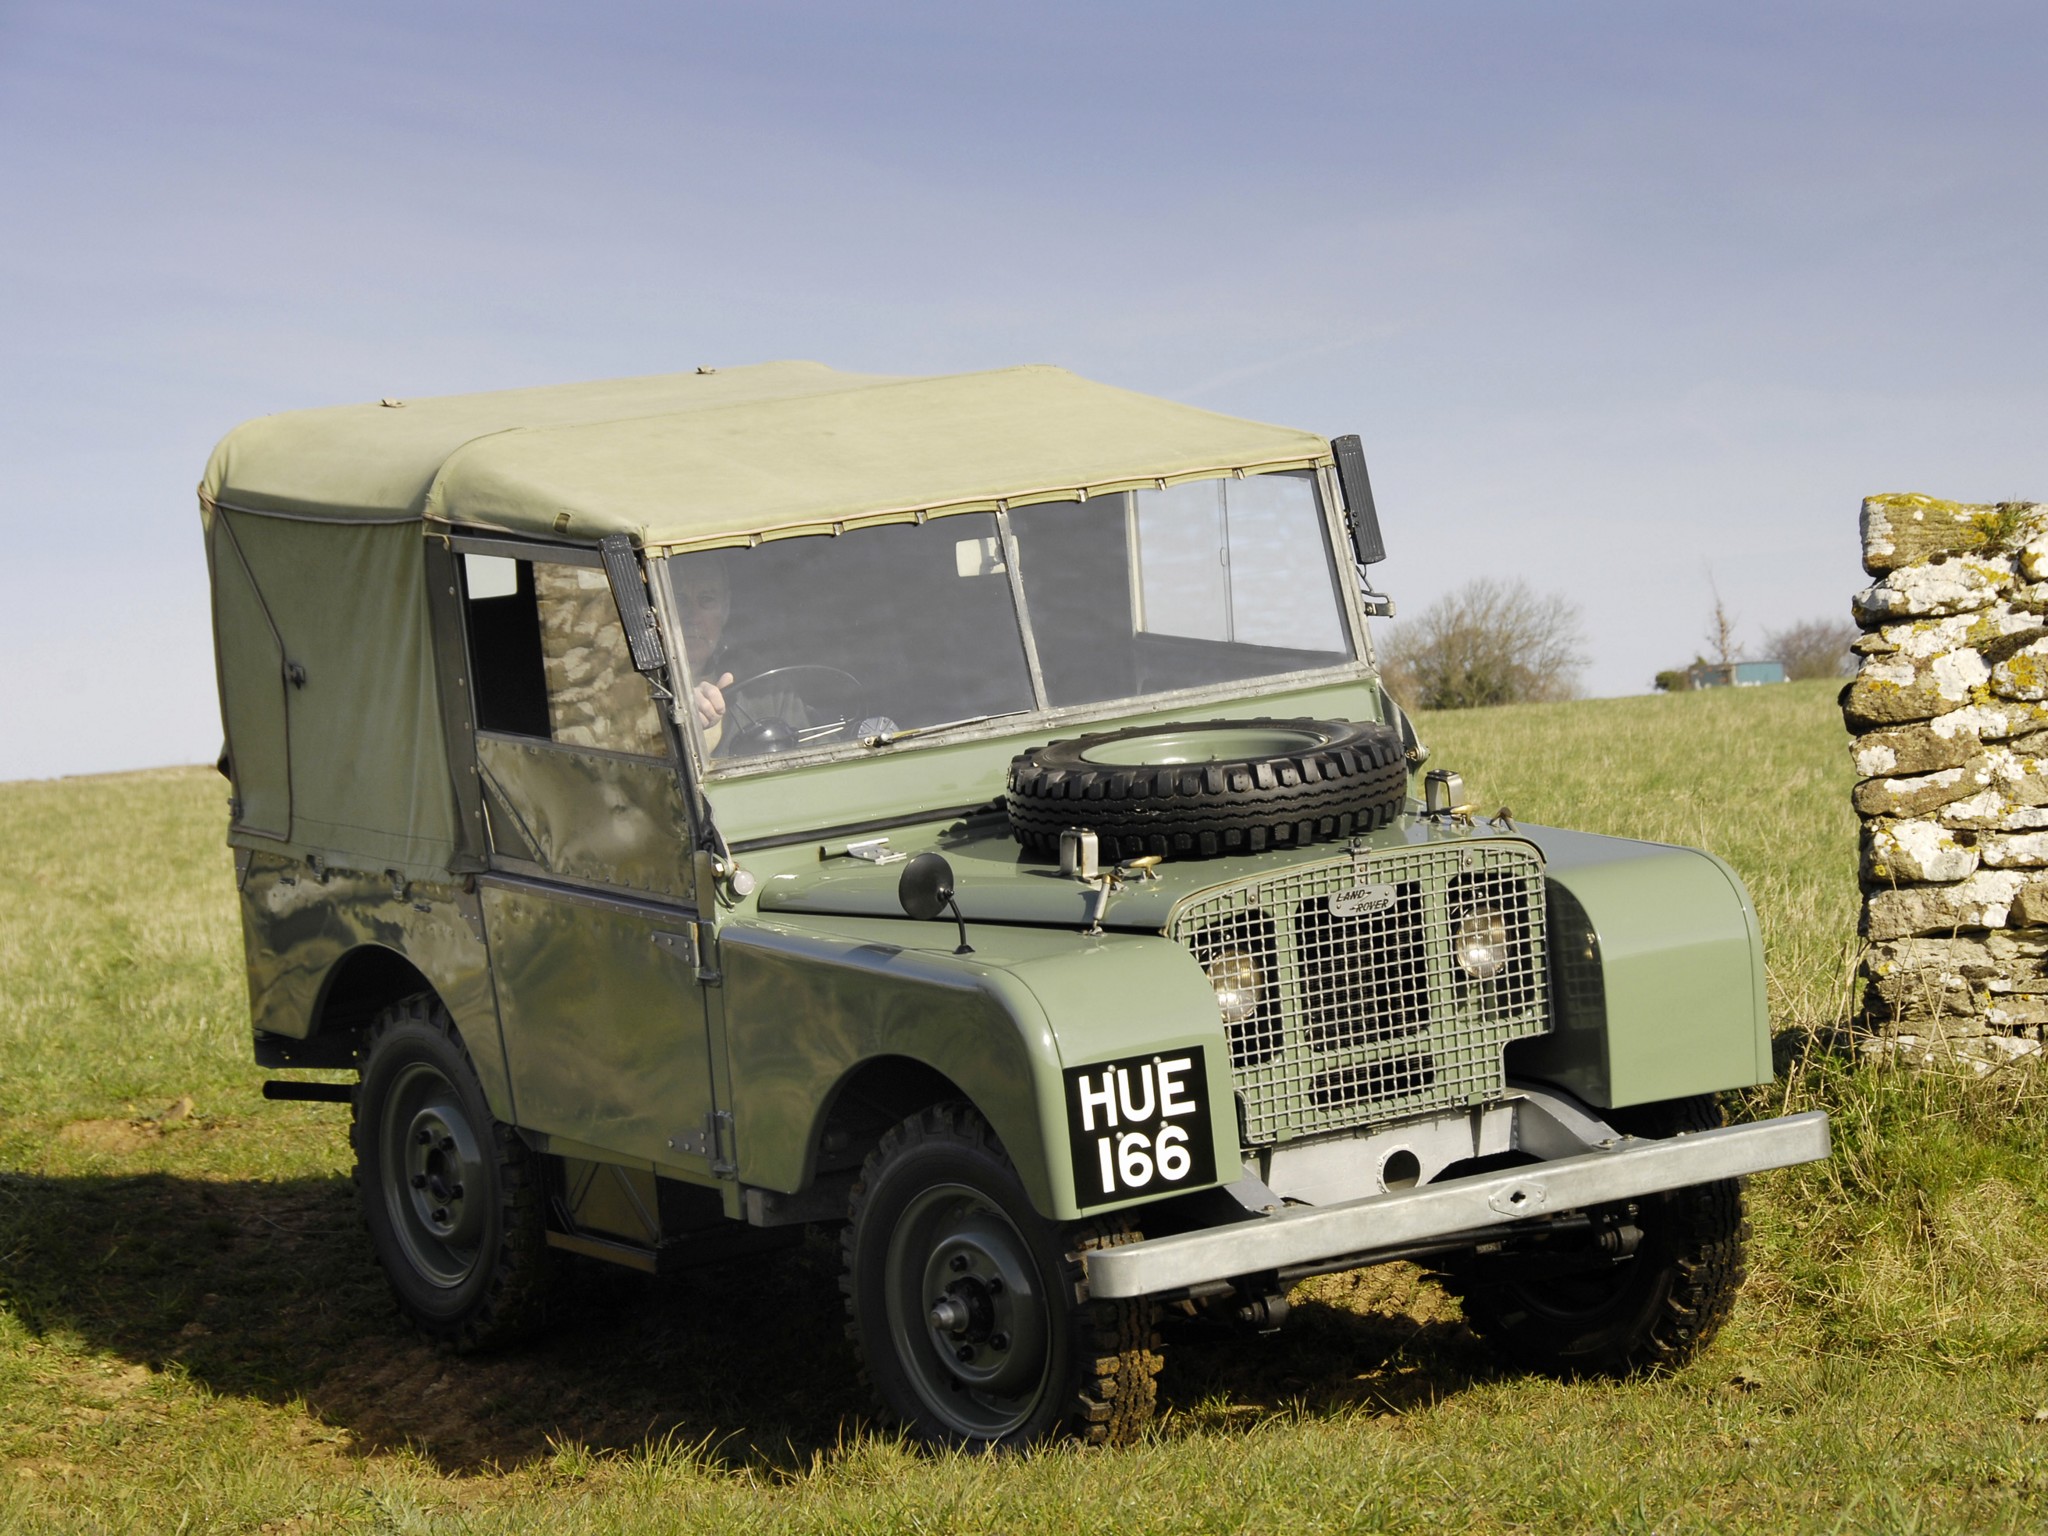 1948, Land, Rover, Series i80, Softtop, 4x4, Offroad, Retro, Military Wallpaper